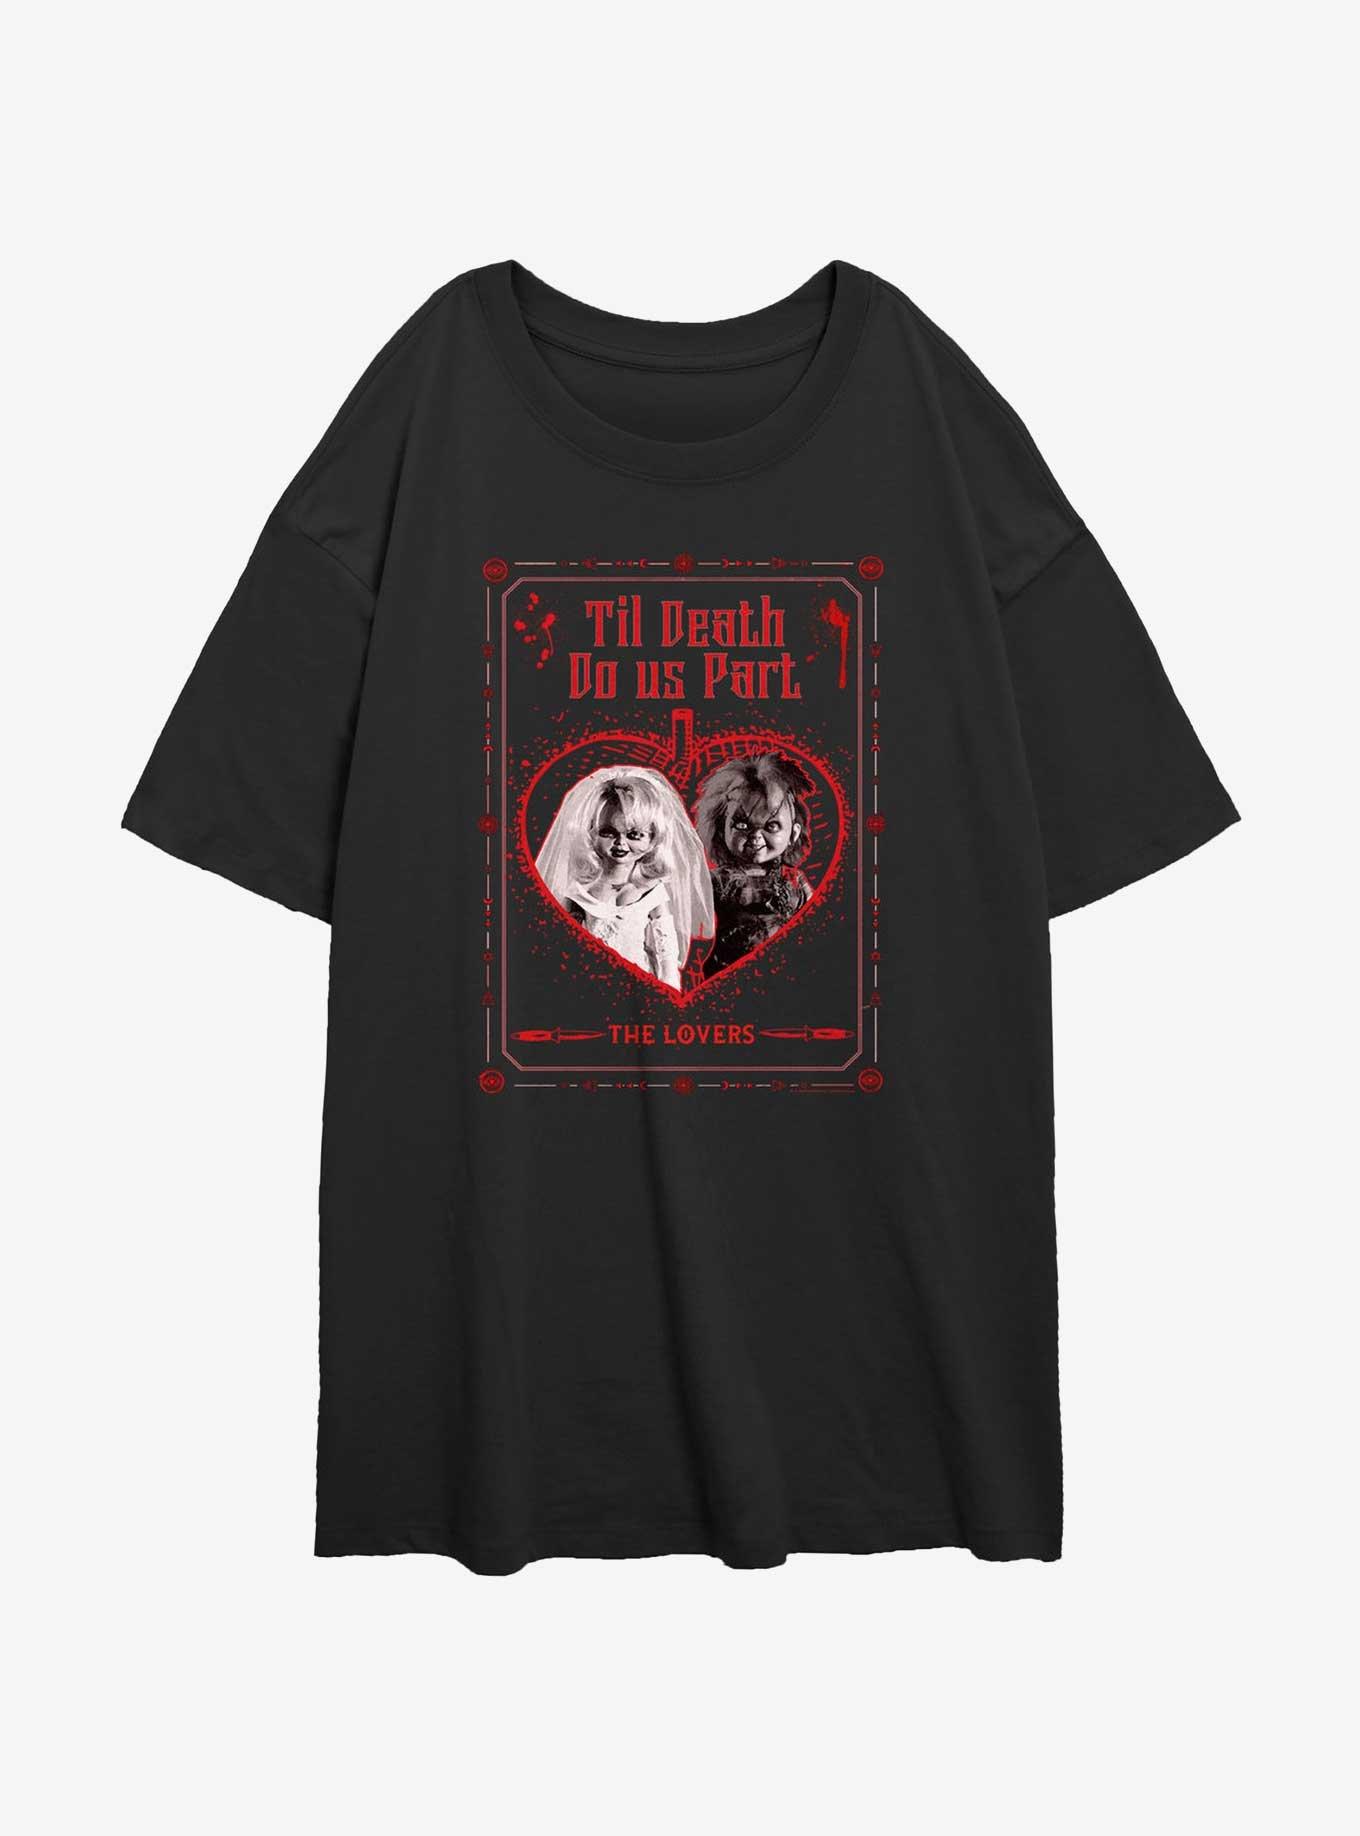 Bride of Chucky The Lovers Girls Oversized T-Shirt, BLACK, hi-res